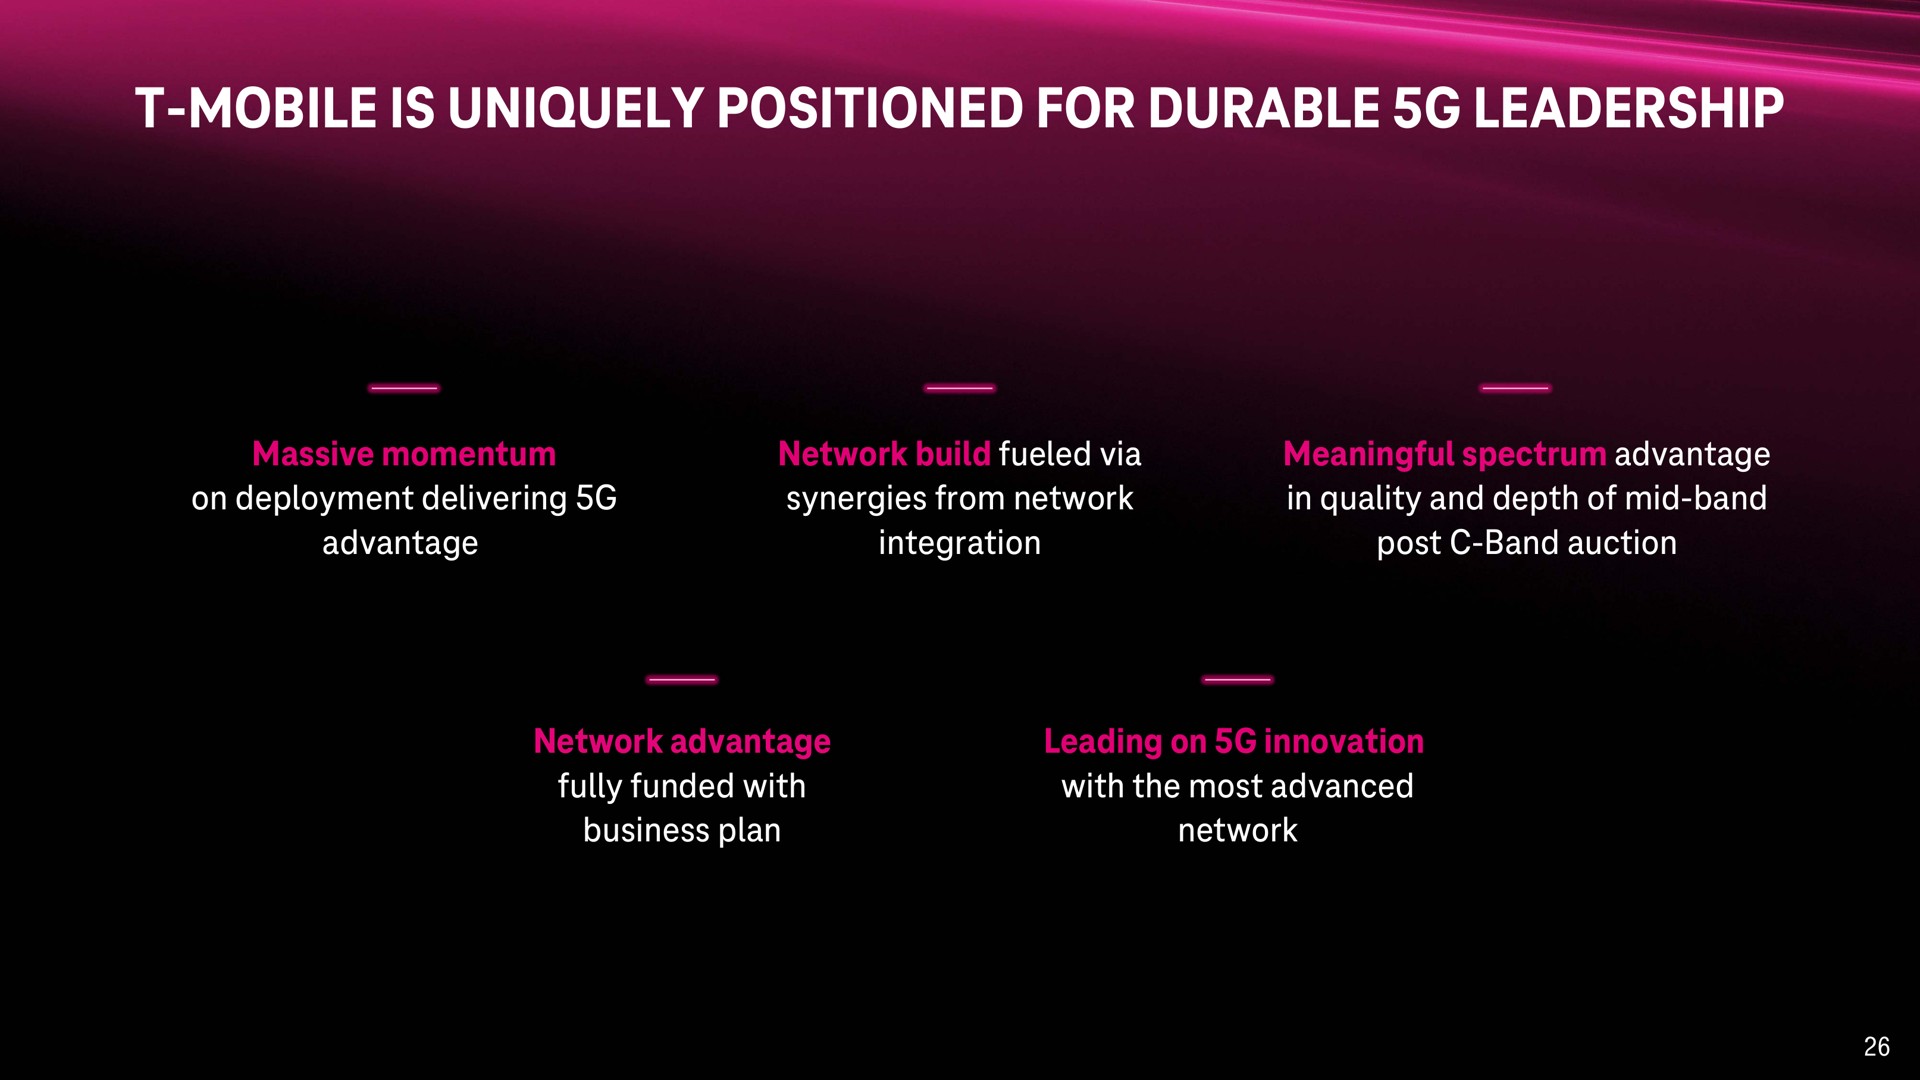 mobile is uniquely positioned for durable leadership | T-Mobile